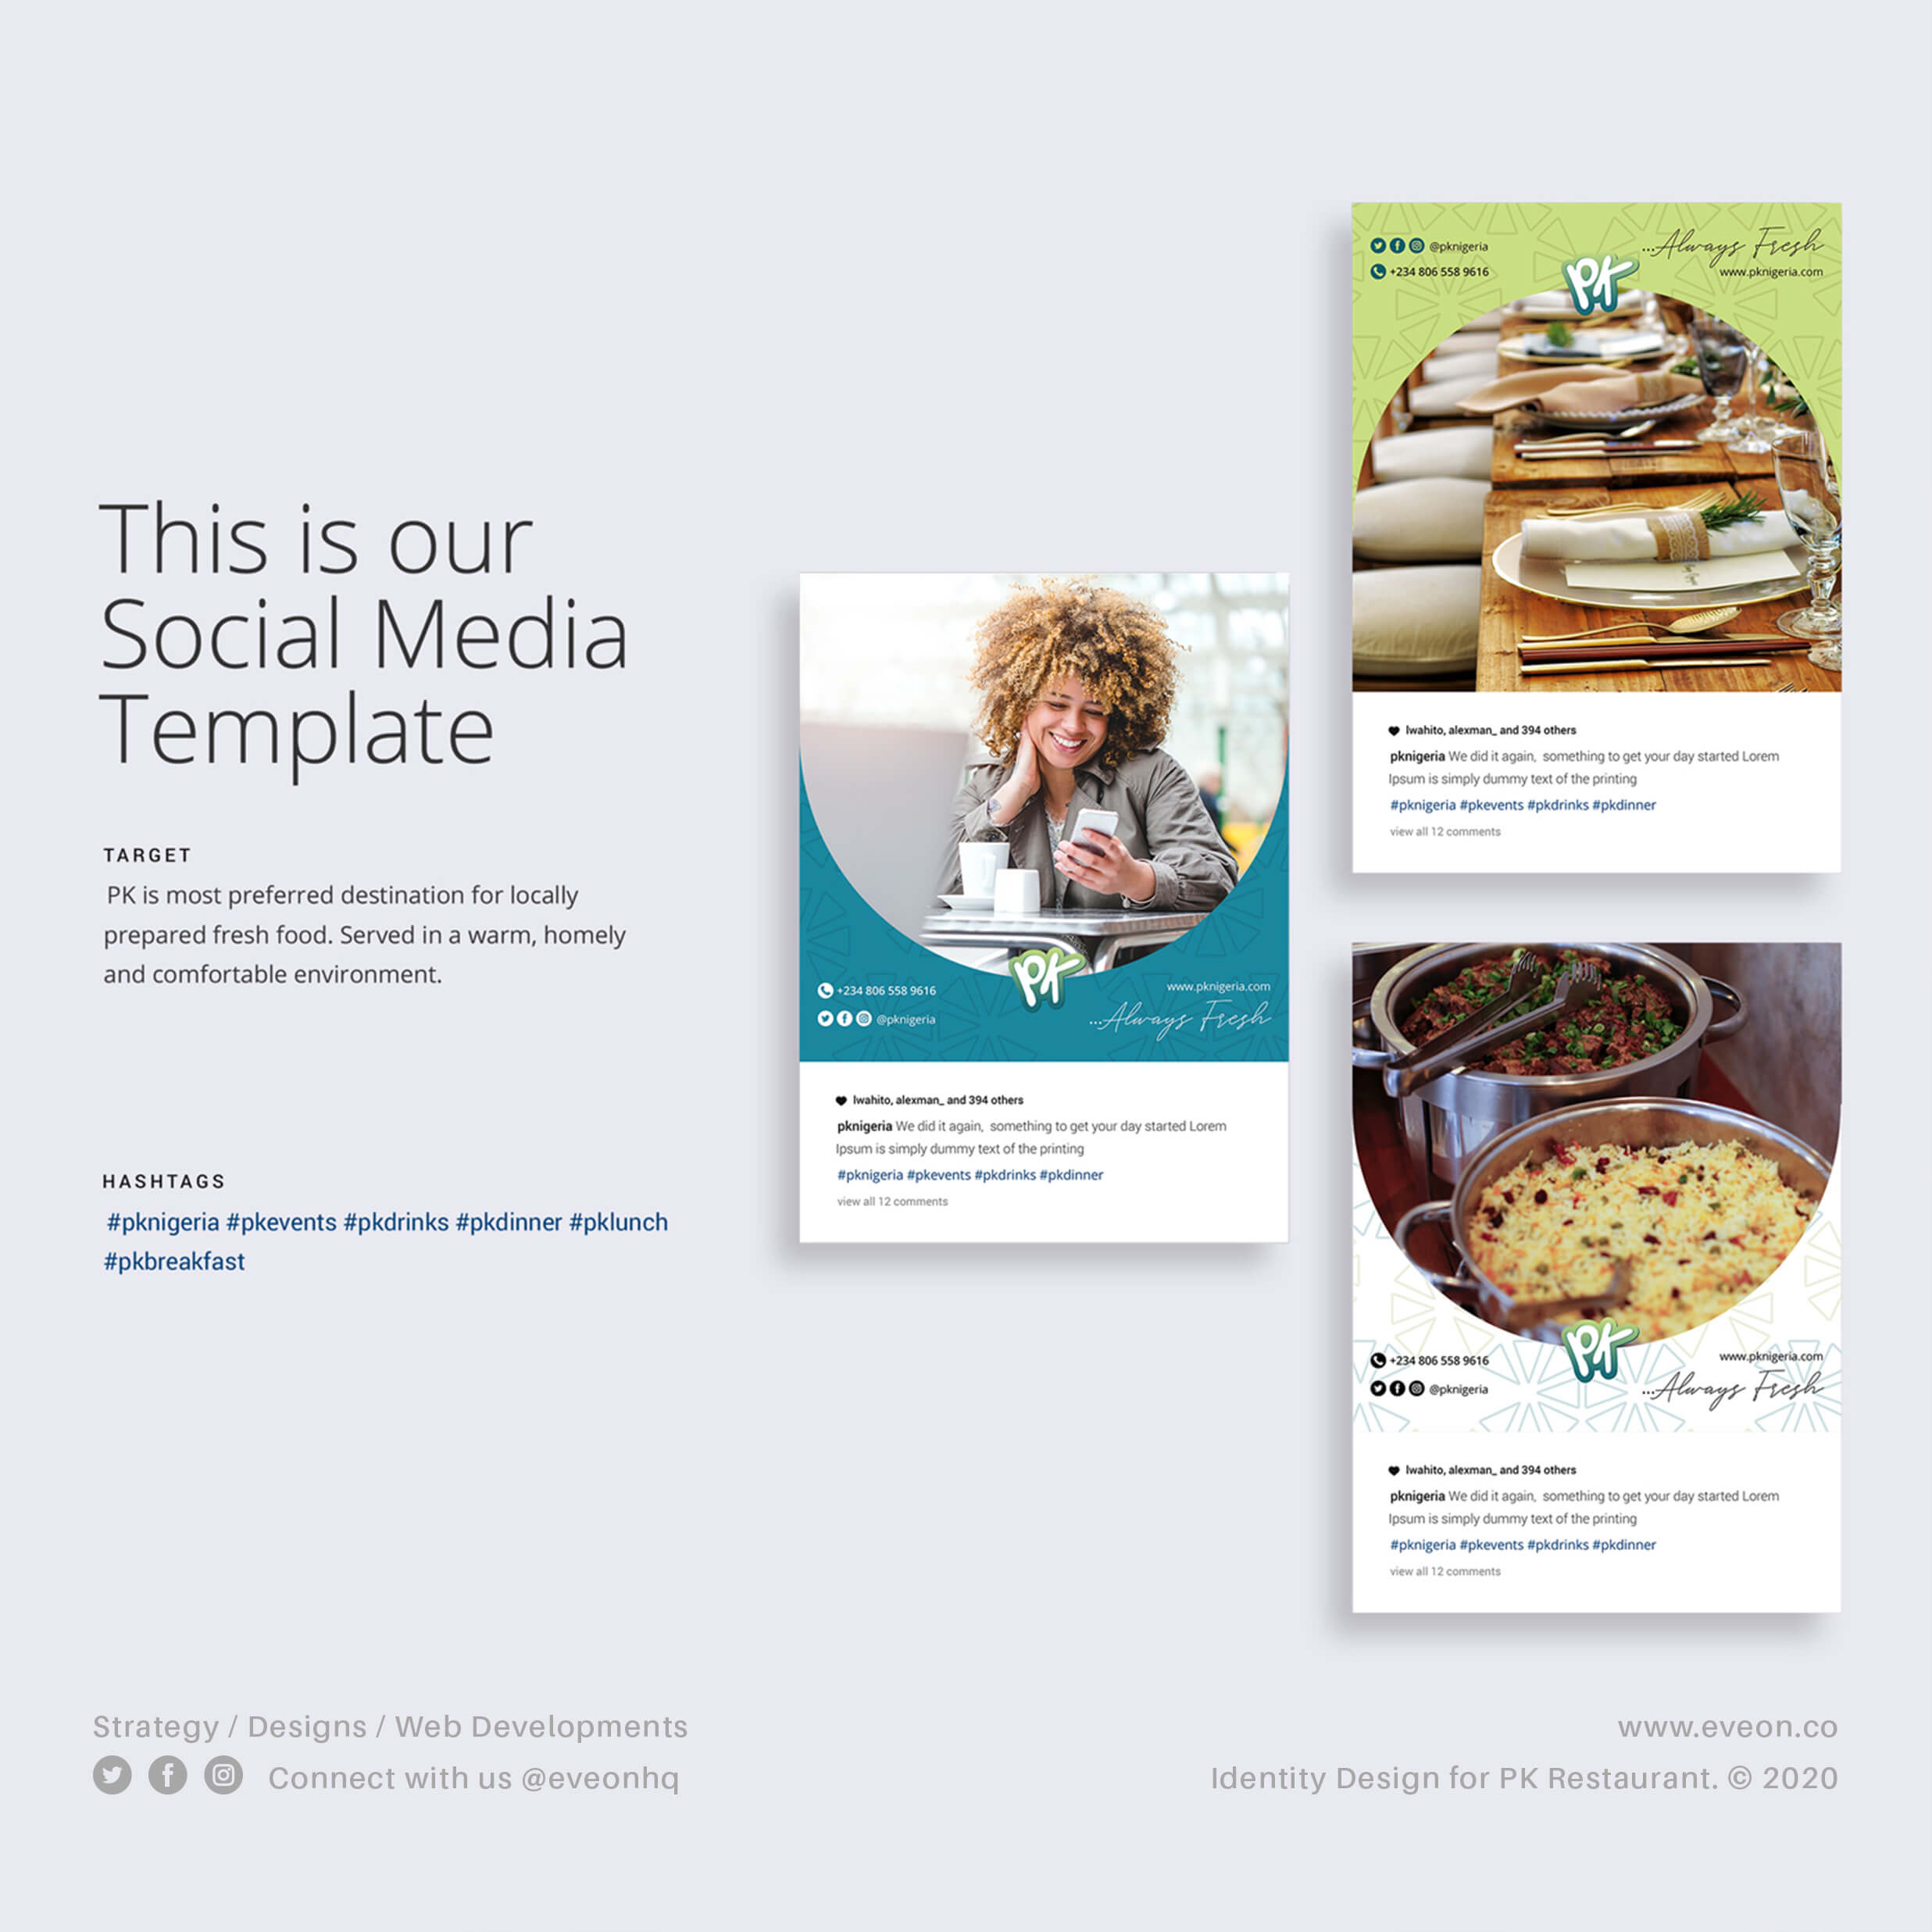 Social Media Template Design by Eveon